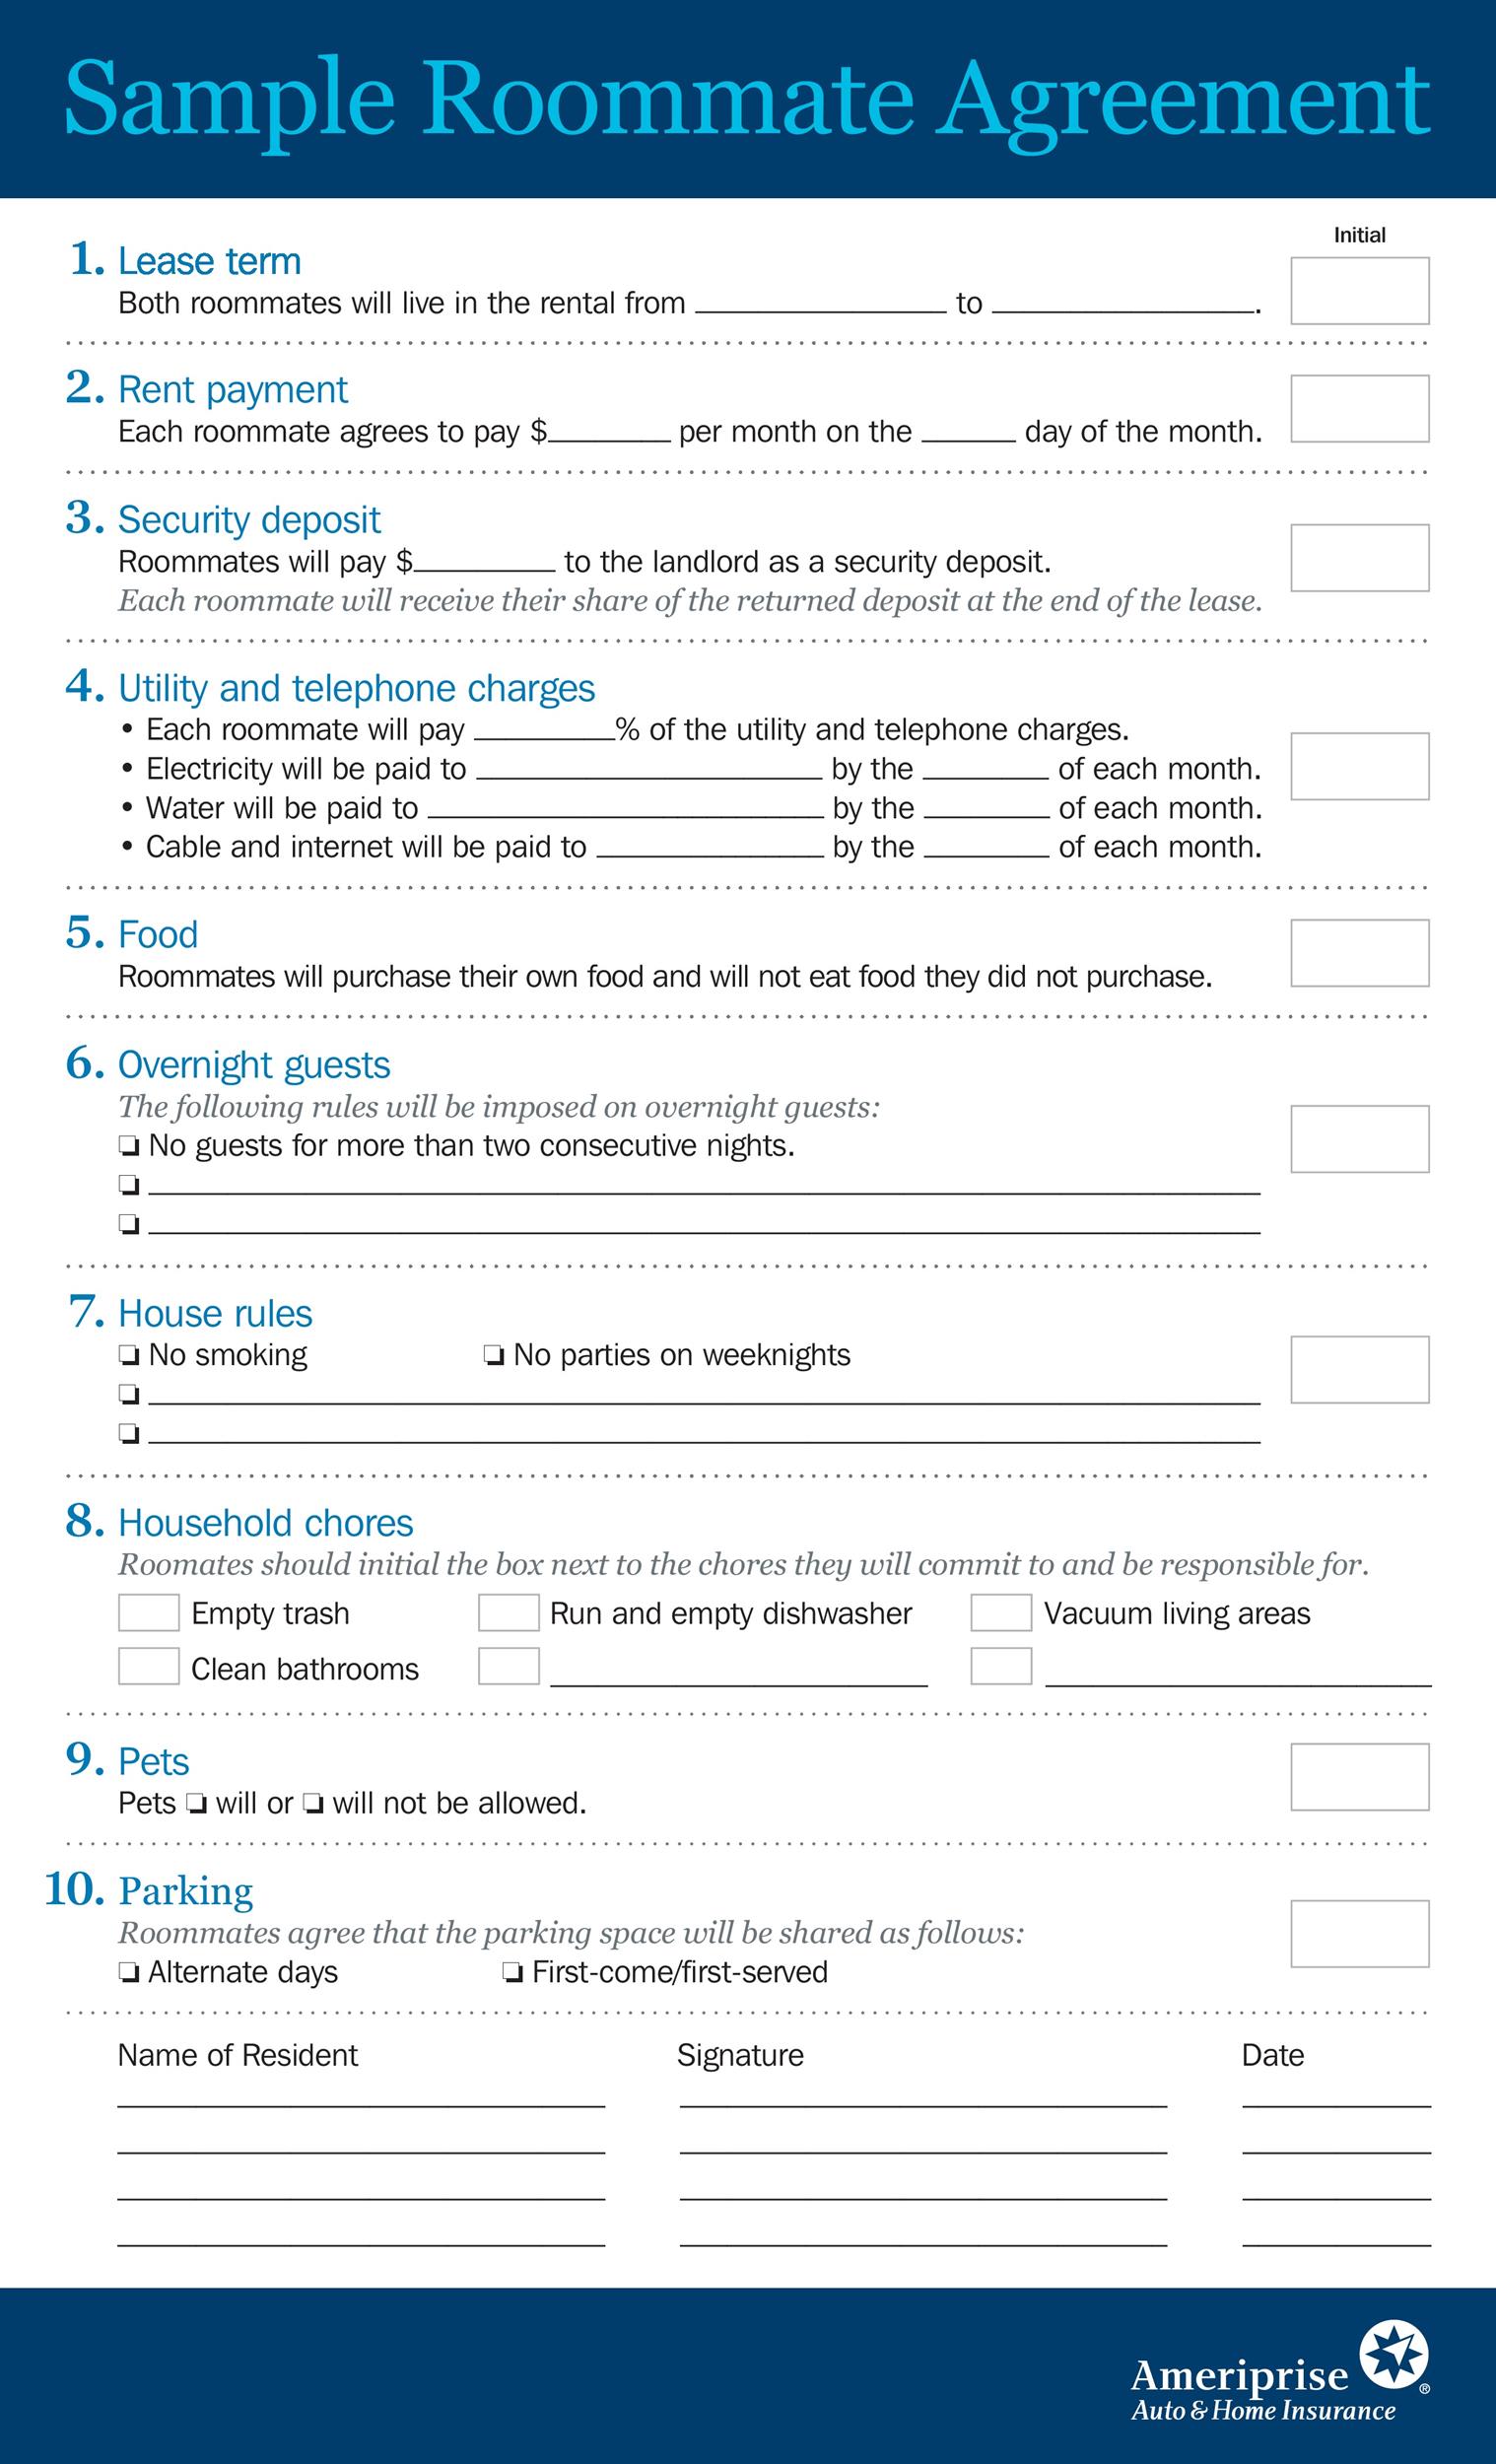 40  Free Roommate Agreement Templates Forms (Word PDF)